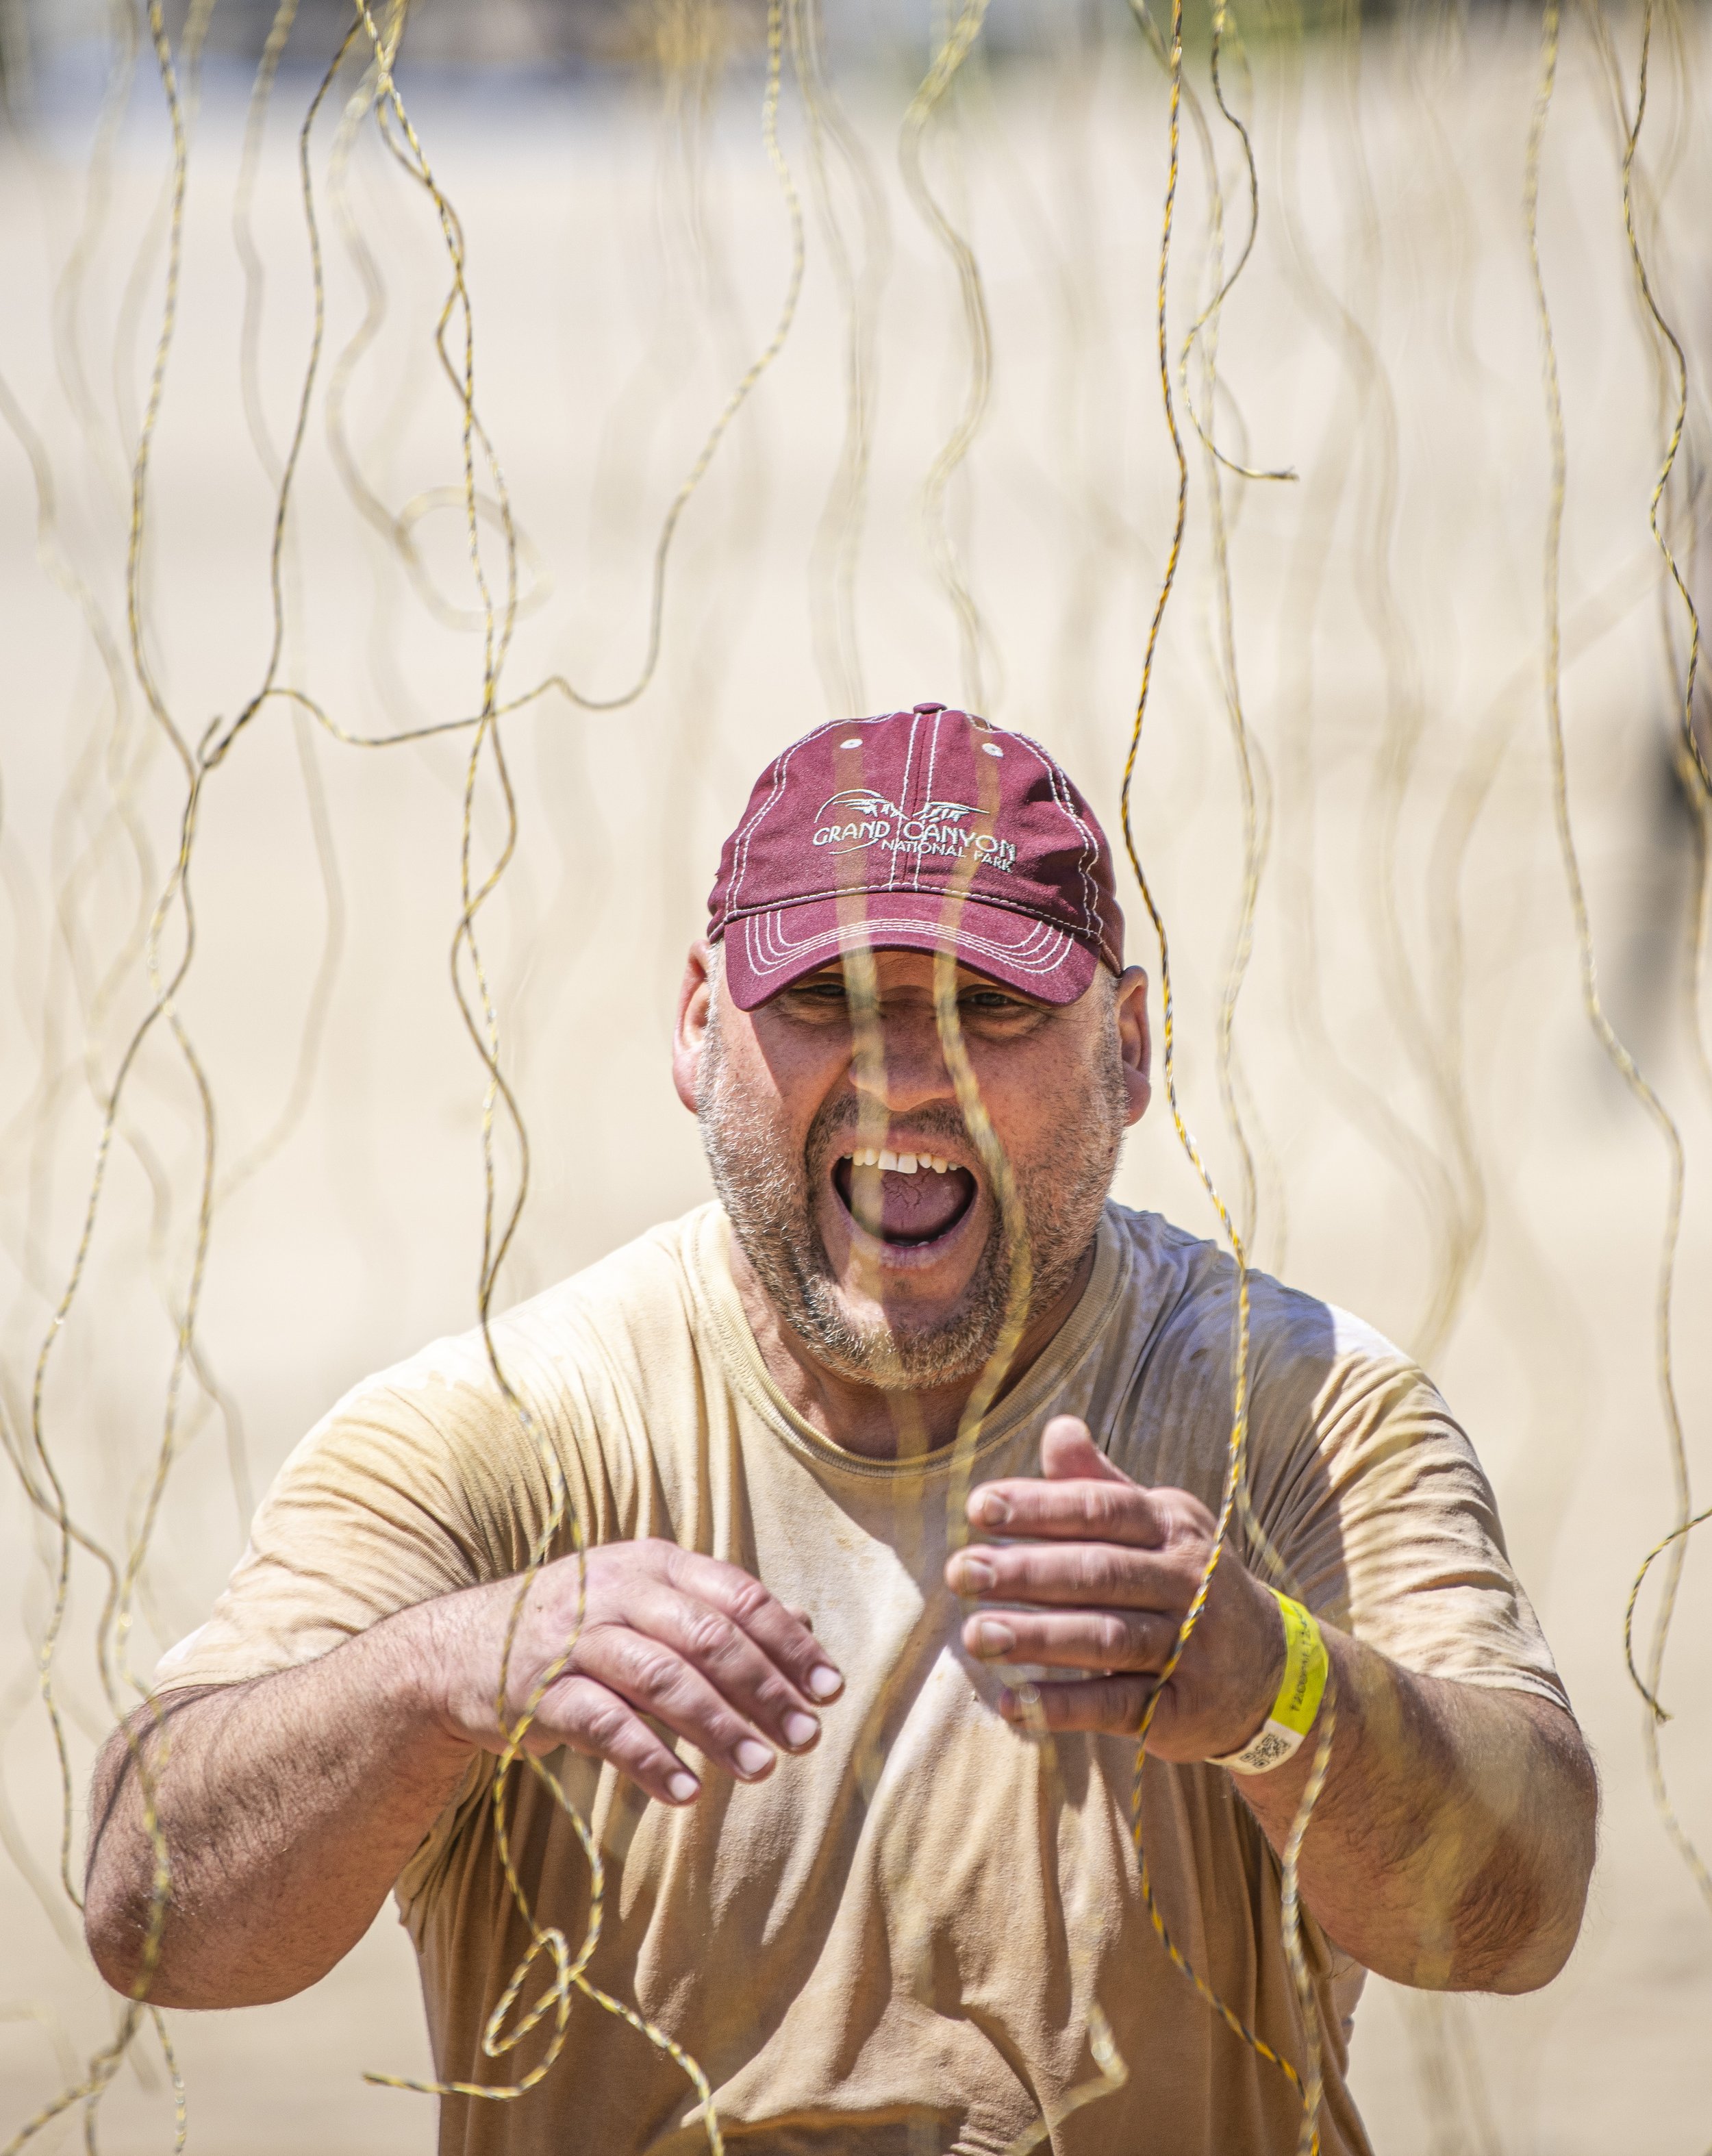  A Tough Mudder Competitor makes his way through the shock wire pit for the final obstacle of the course at the Tough Mudder event held in San Bernadino on April 9, 2022. (Jon Putman | The Corsair) 